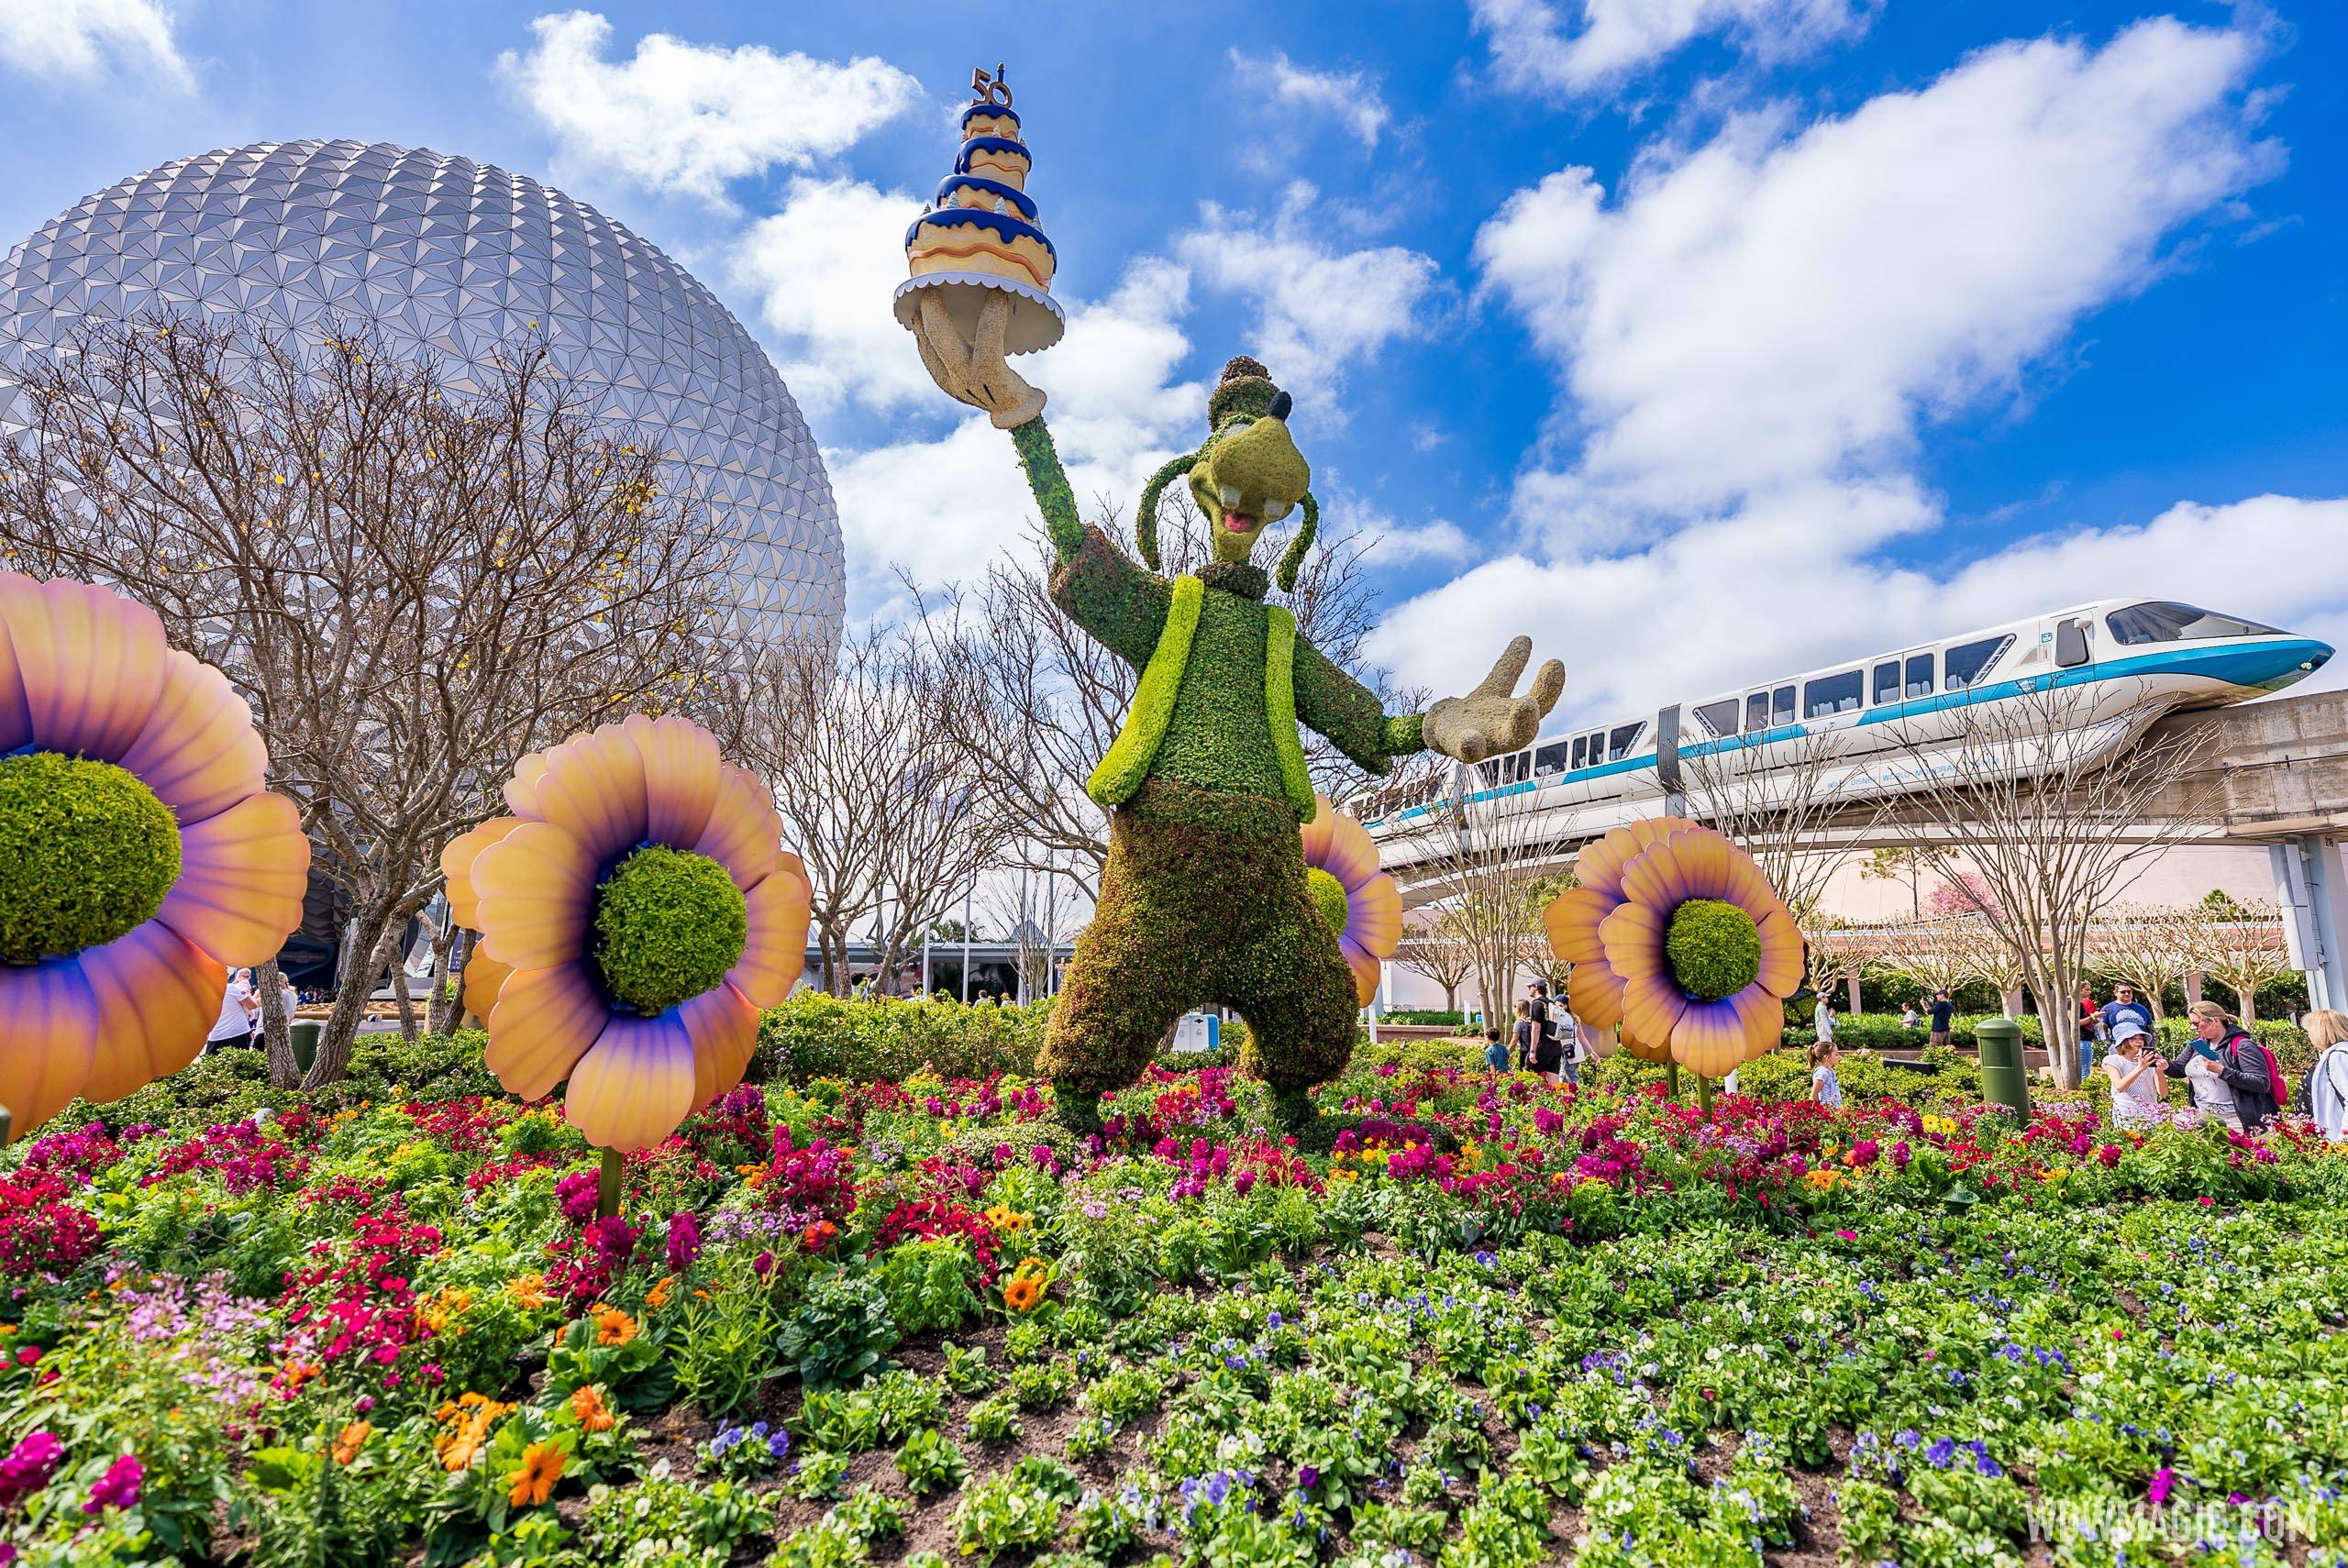 Garden Rocks Concert Series is included with admission to EPCOT